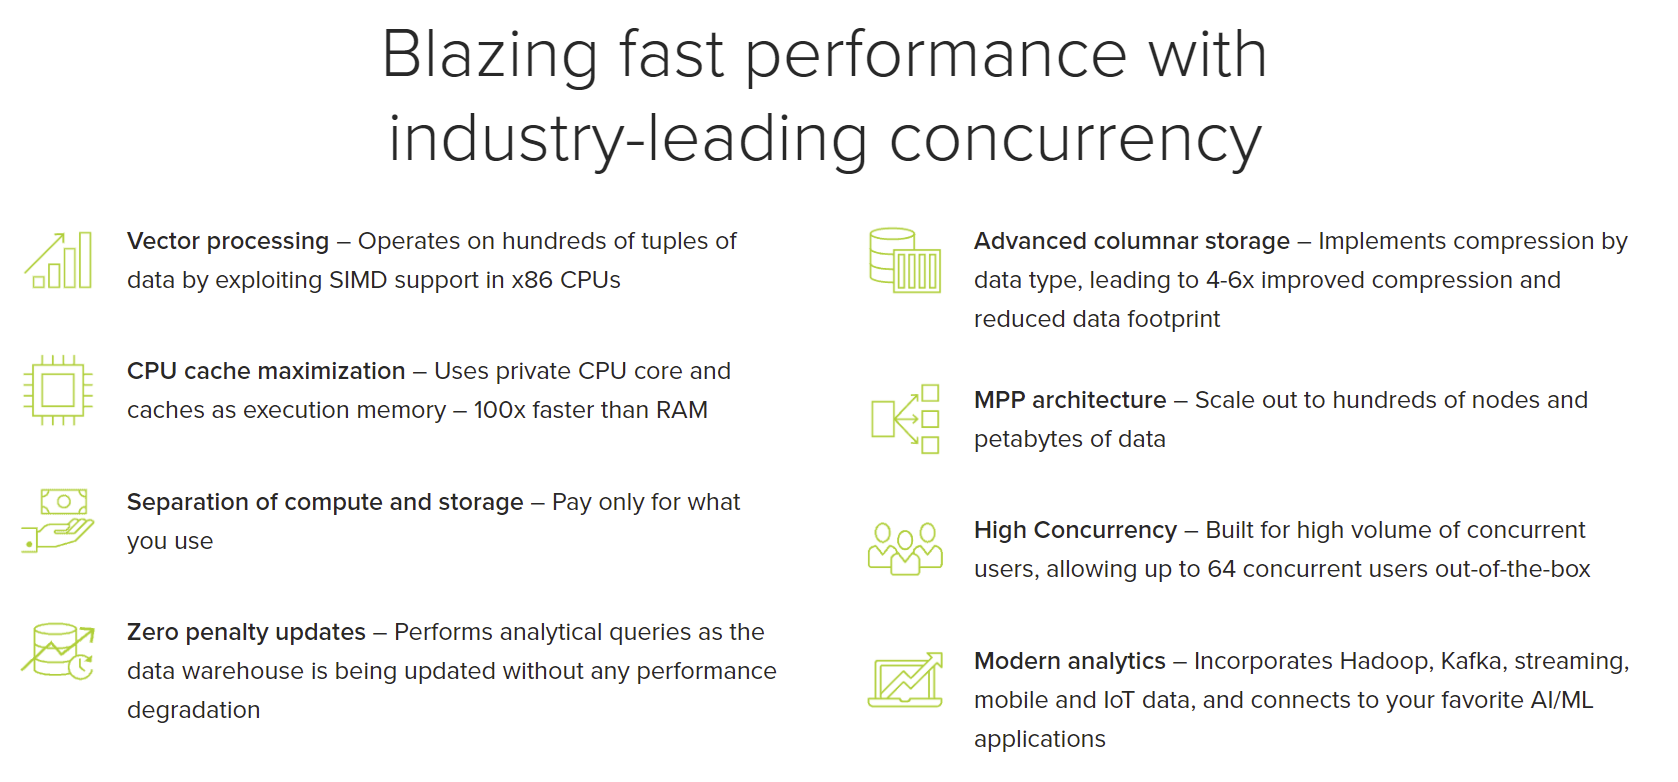 Blazing fast performance with industry-leading concurrency. Features vector processing, CPU cache maximization, separation of compute and storage, zero penalty updates, advanced columnar storage, MPP architecture, high concurrency, and modern analytics.